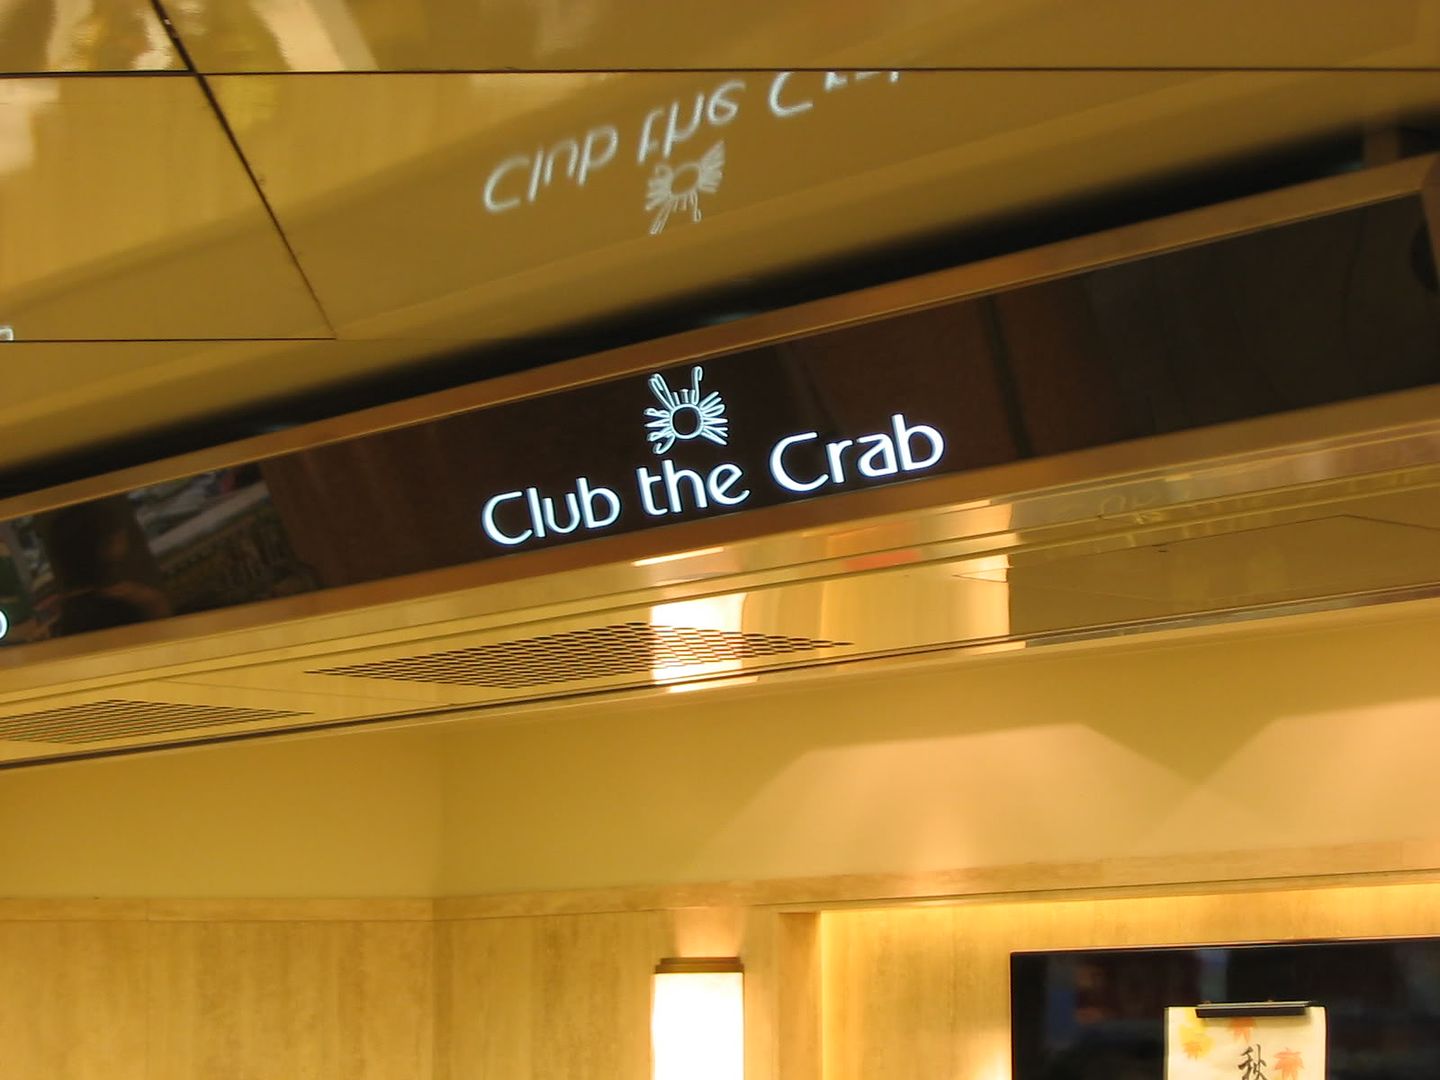 Club the Crab Pictures, Images and Photos